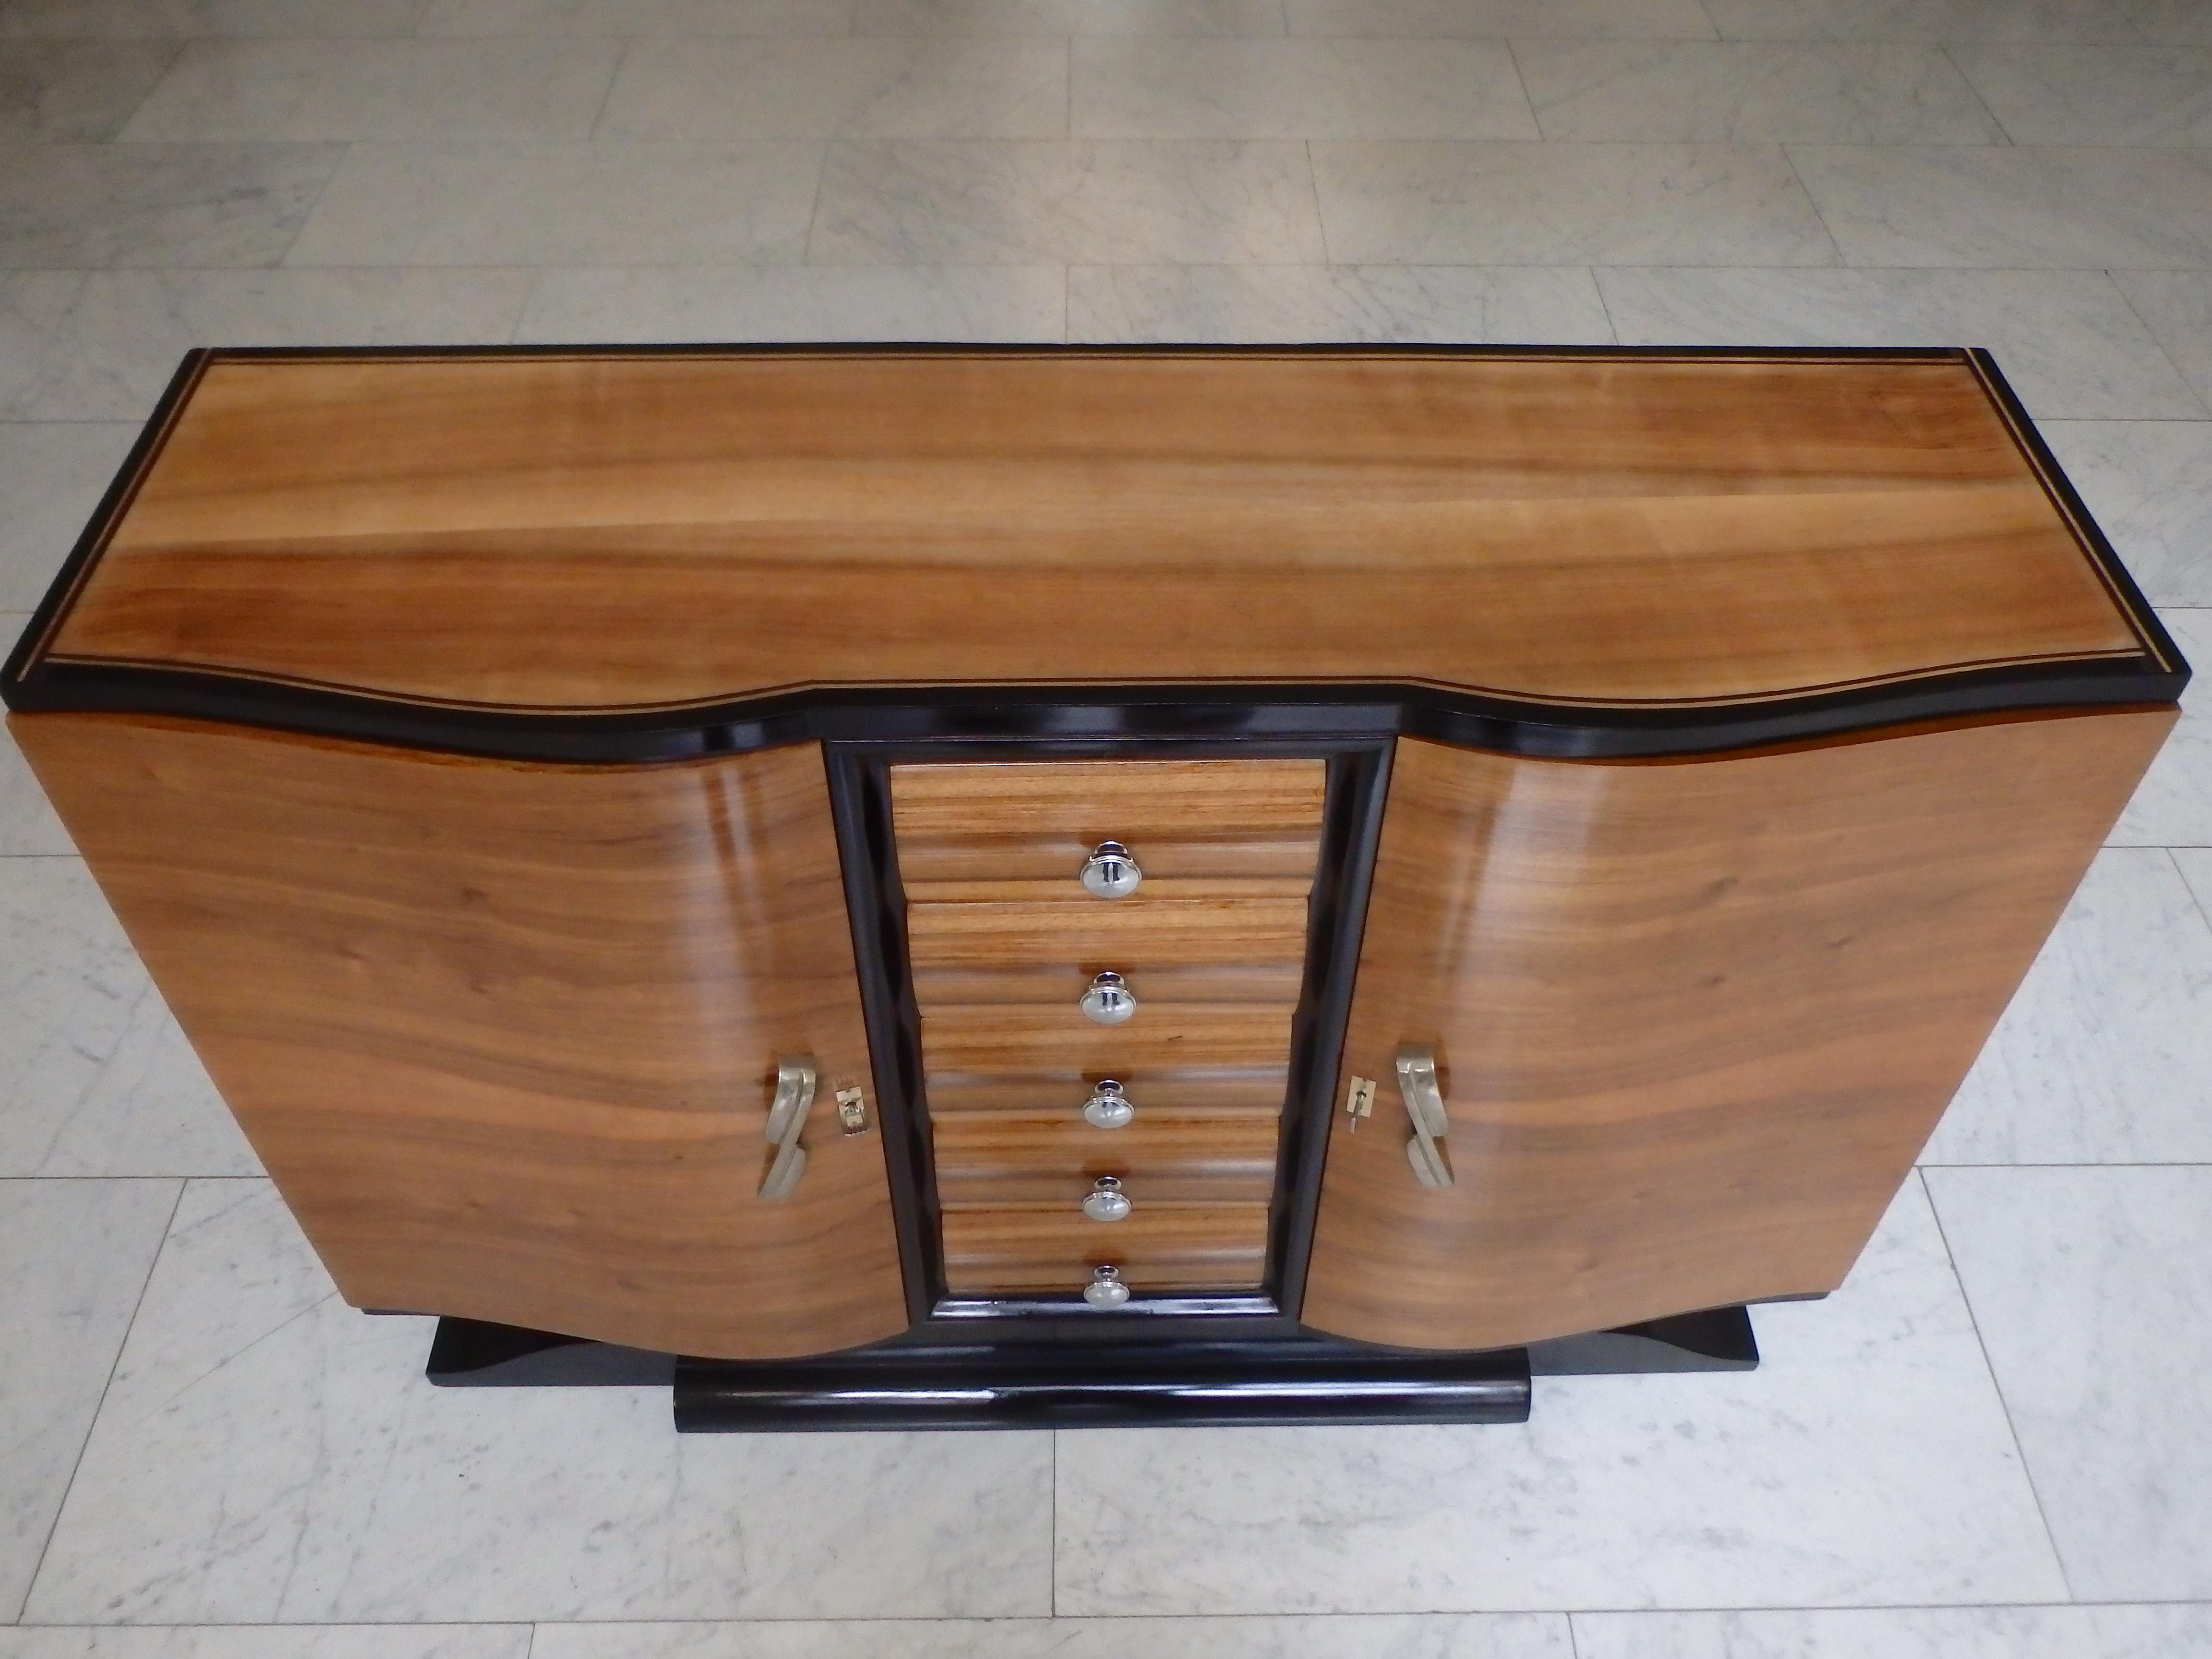 Art Deco Sideboard with 5 Drawers Rounded Doors Chrome Handles Mustache Foot For Sale 4